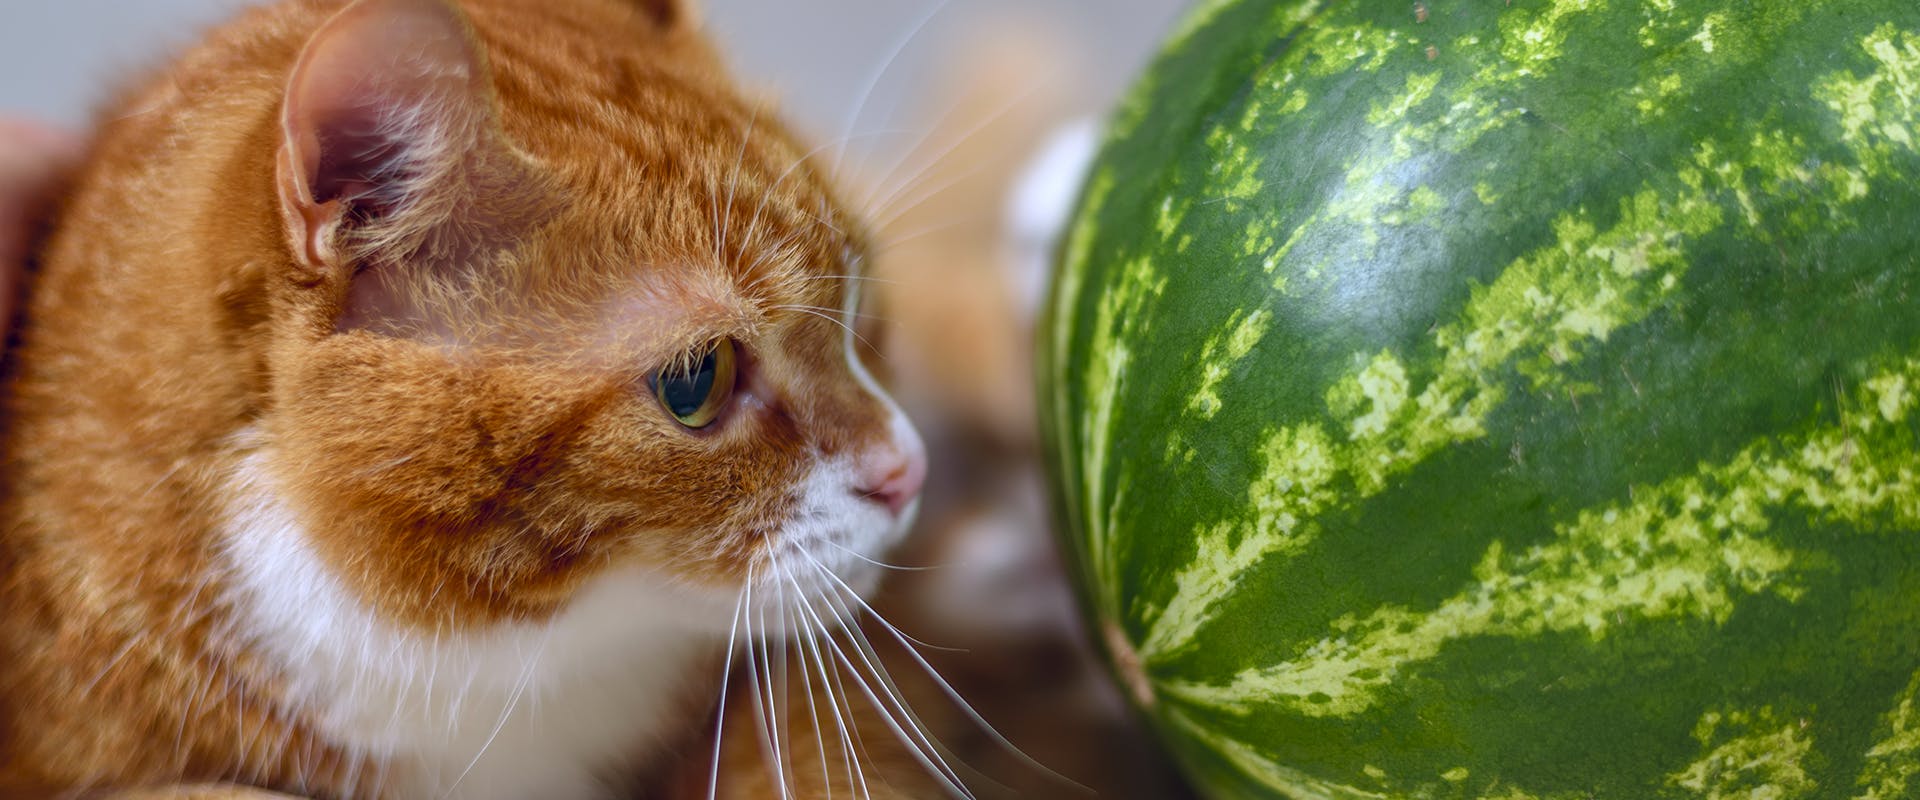 A ginger cat looking at a large watermelon